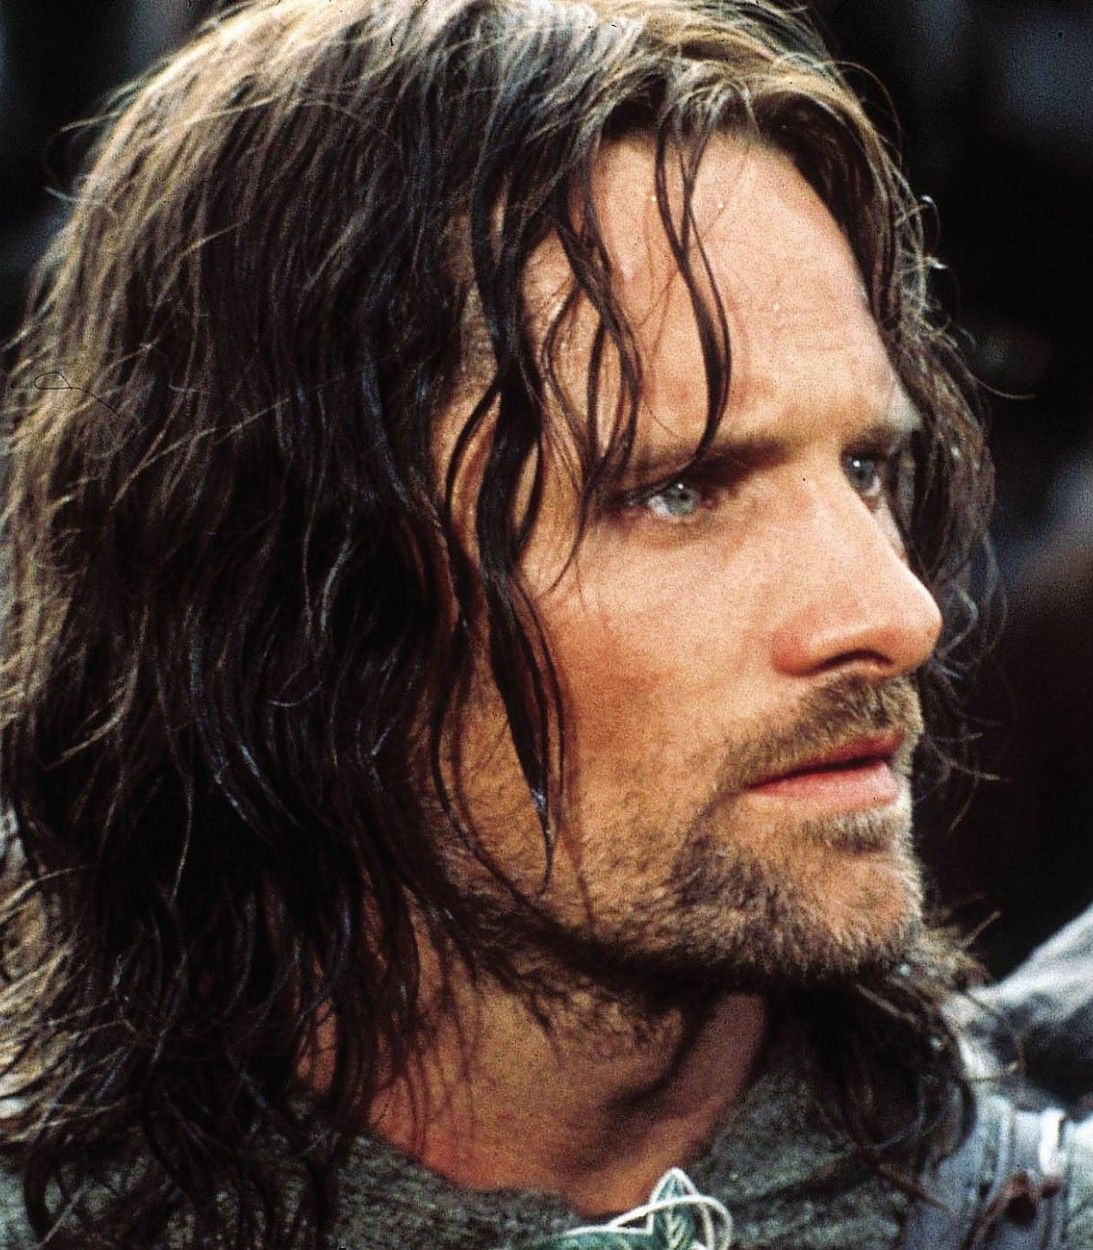 Viggo Mortensen as Aragorn in The Lord of the Rings vertical